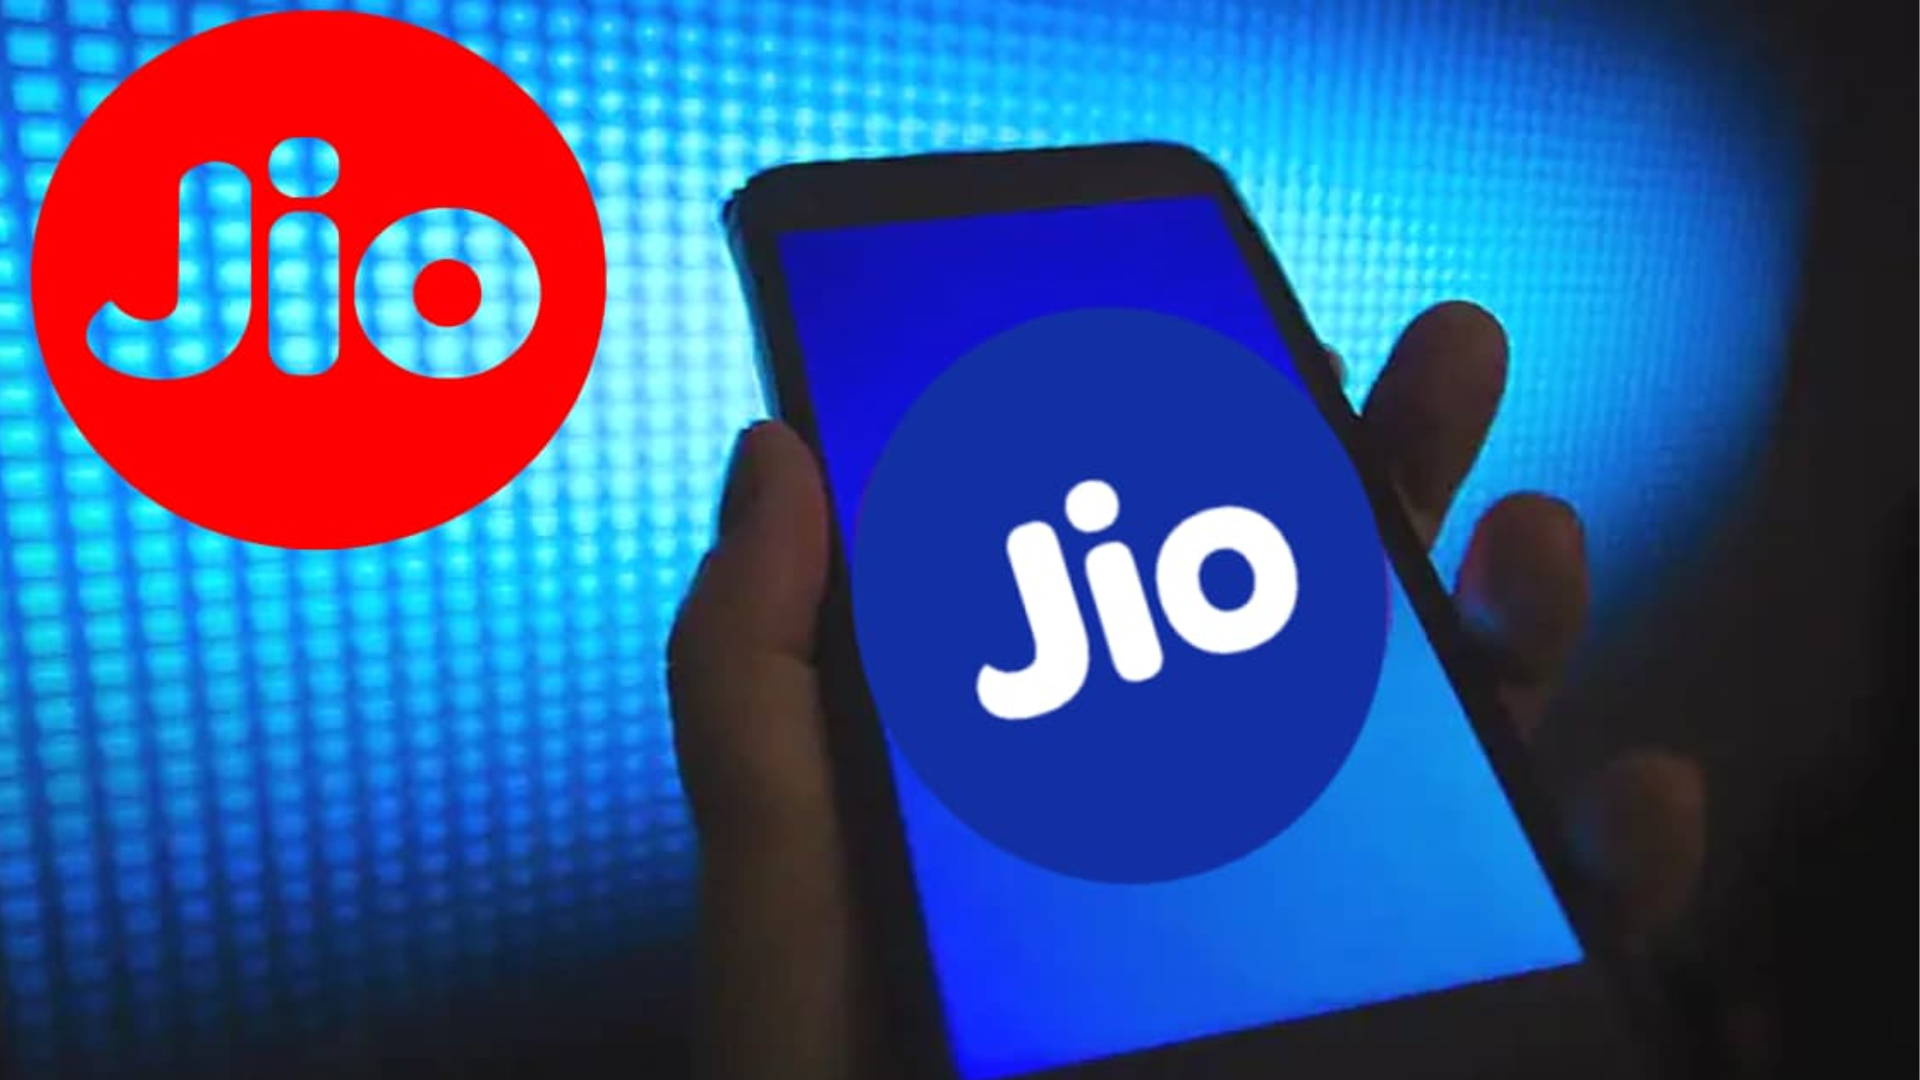 How to Get Free Data in Jio: Get Up to 25 GB Free Data 